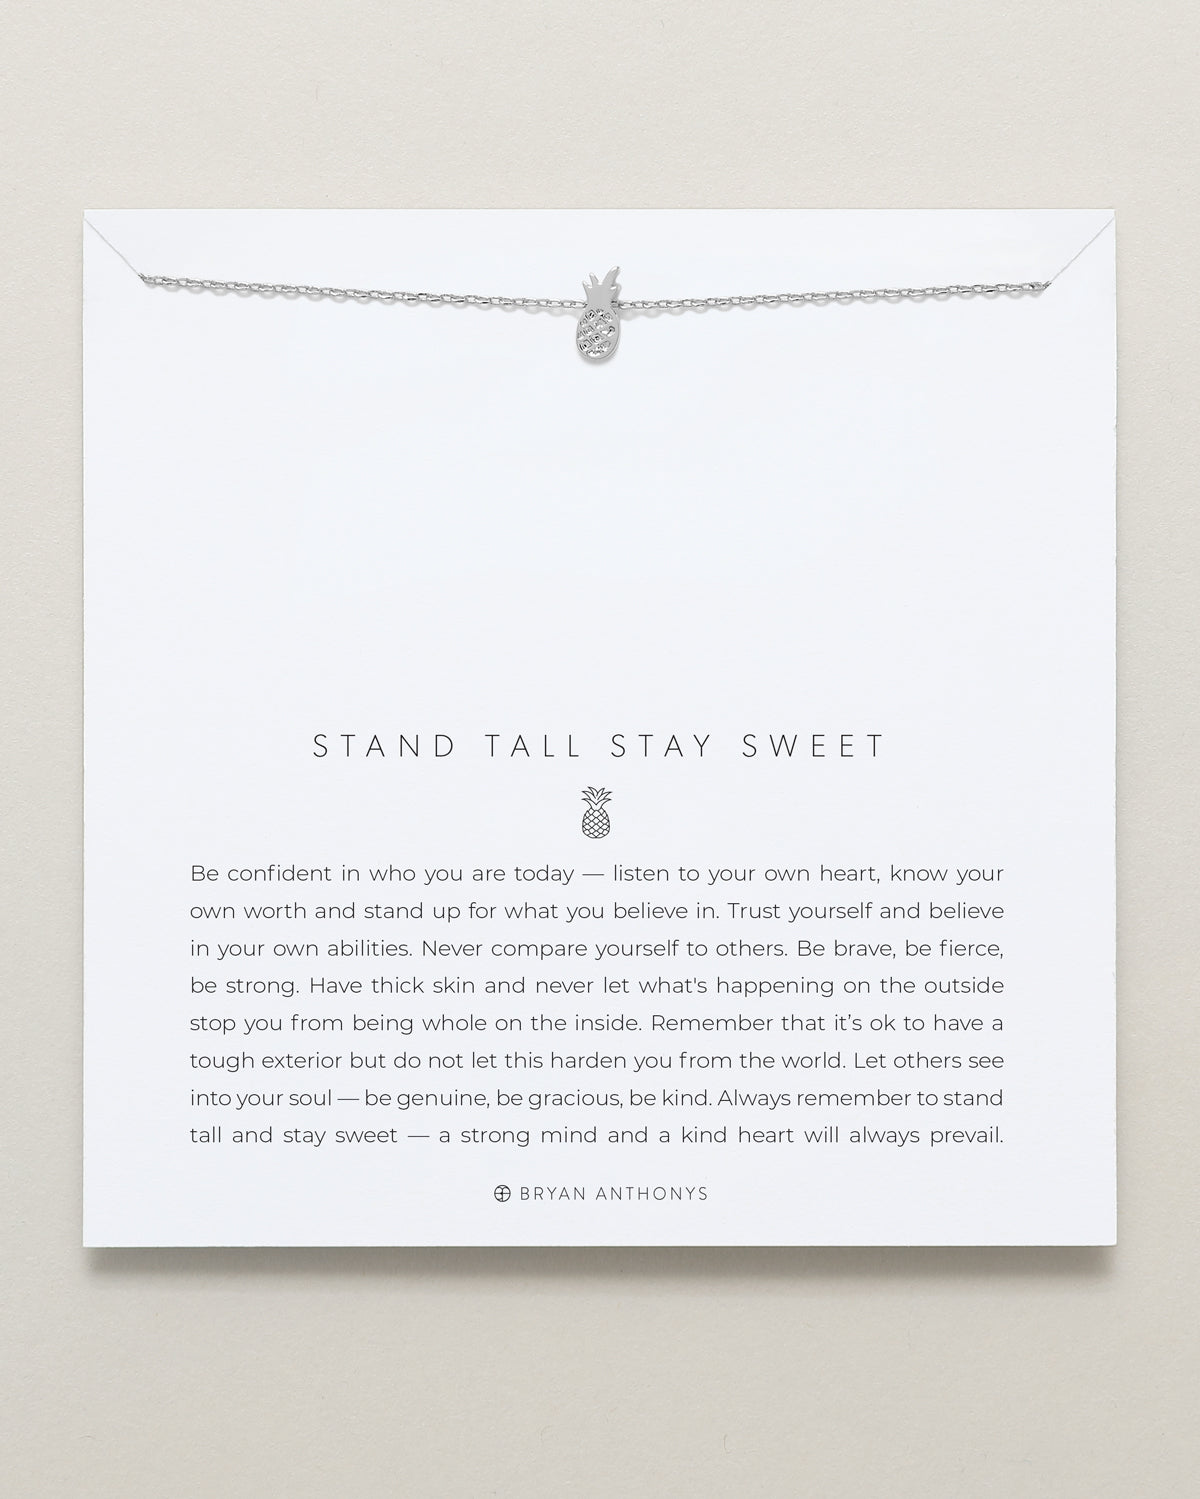 Bryan Anthonys Stand Tall Stay Sweet Silver Charm Necklace On Card